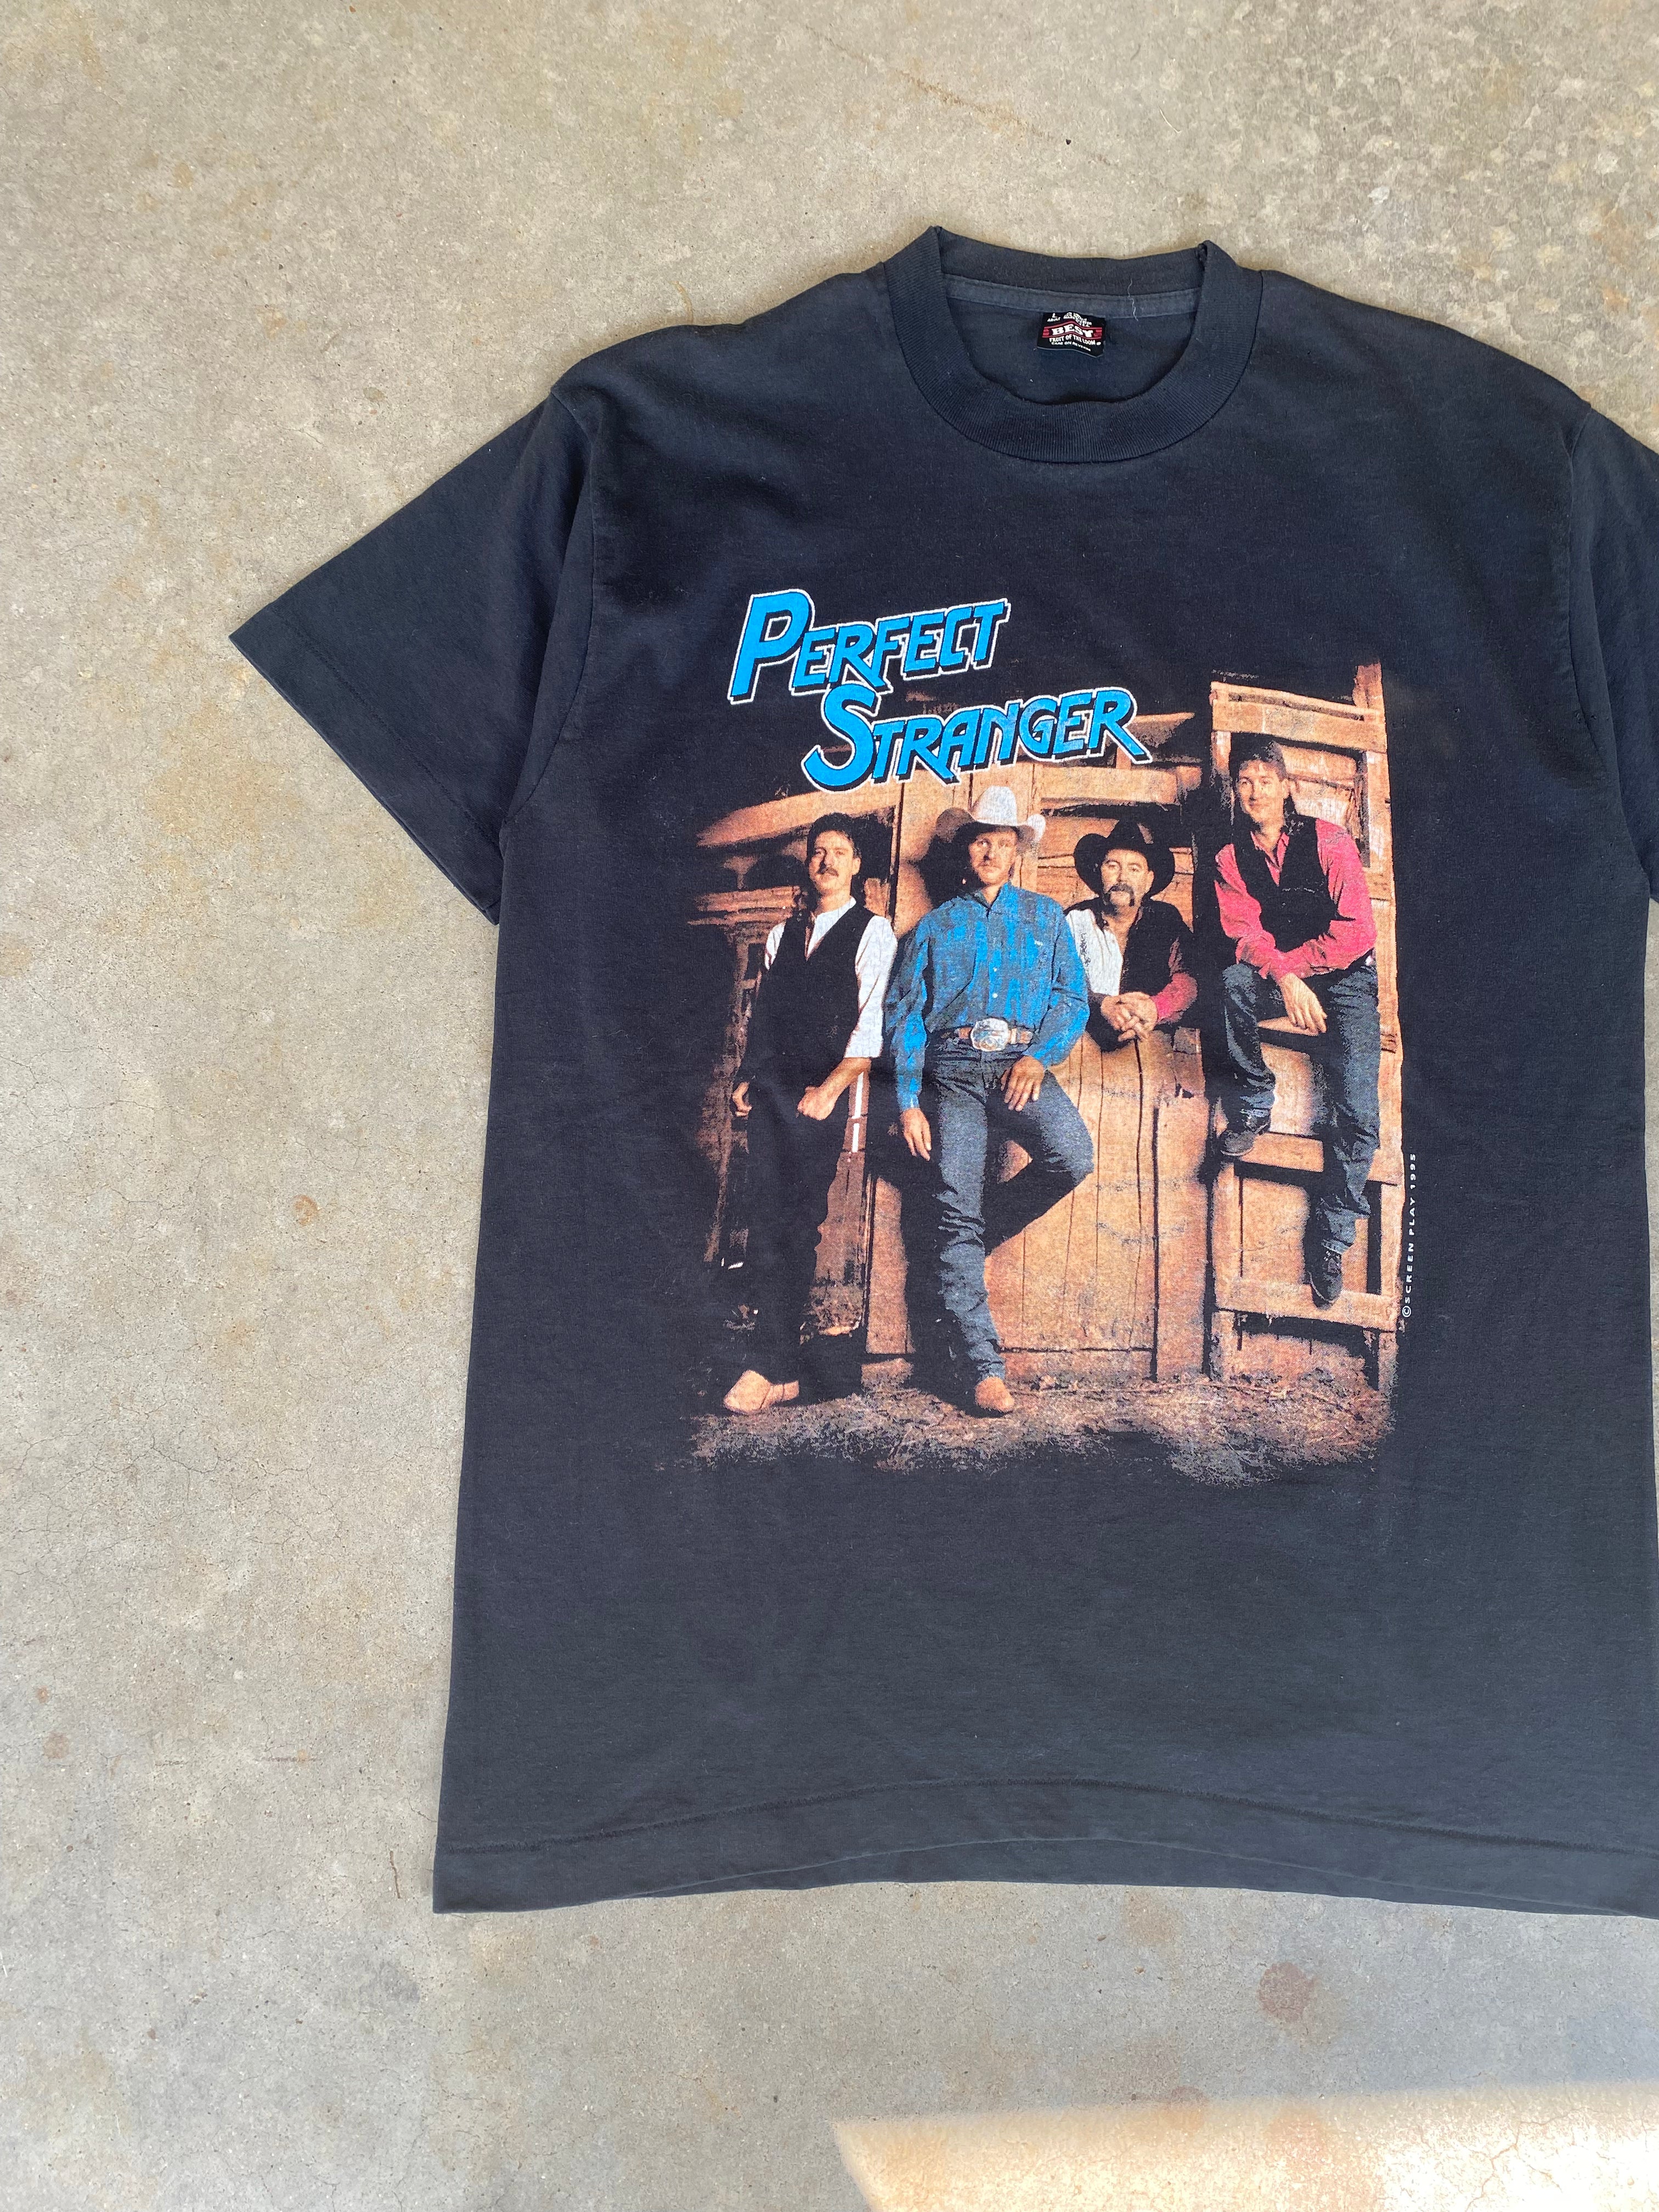 1995 Perfect Stranger Country Music T-Shirt (L)